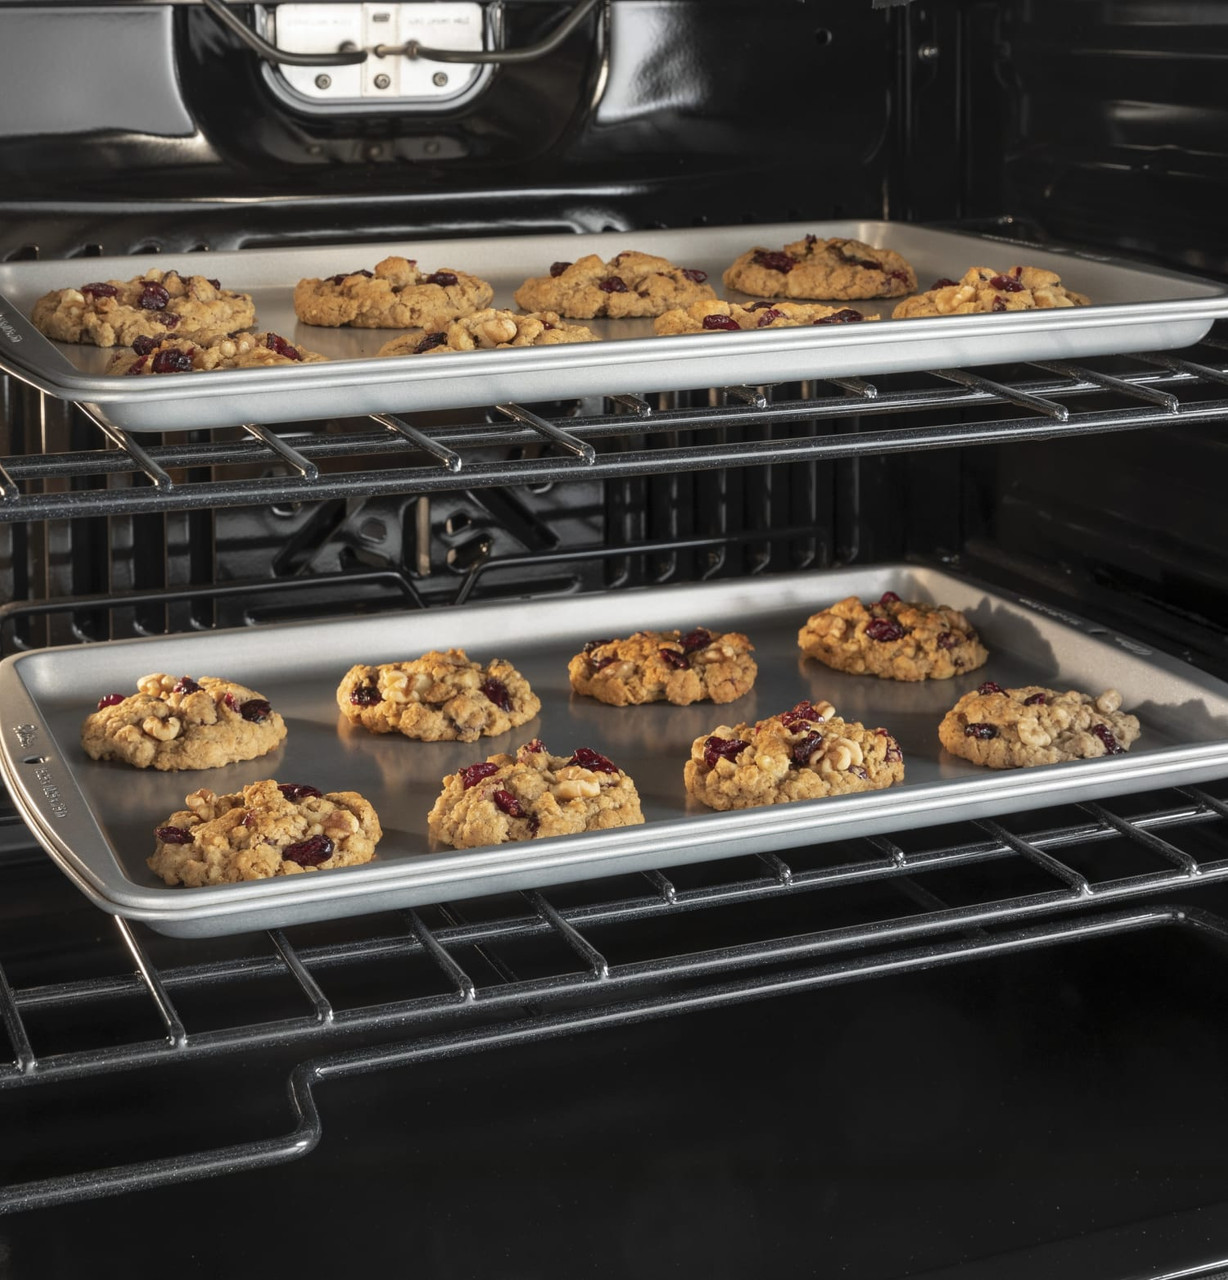 GE® 30” Smart Built-In Self-Clean Double Wall Oven with Never-Scrub Racks - JTD3000DNWW